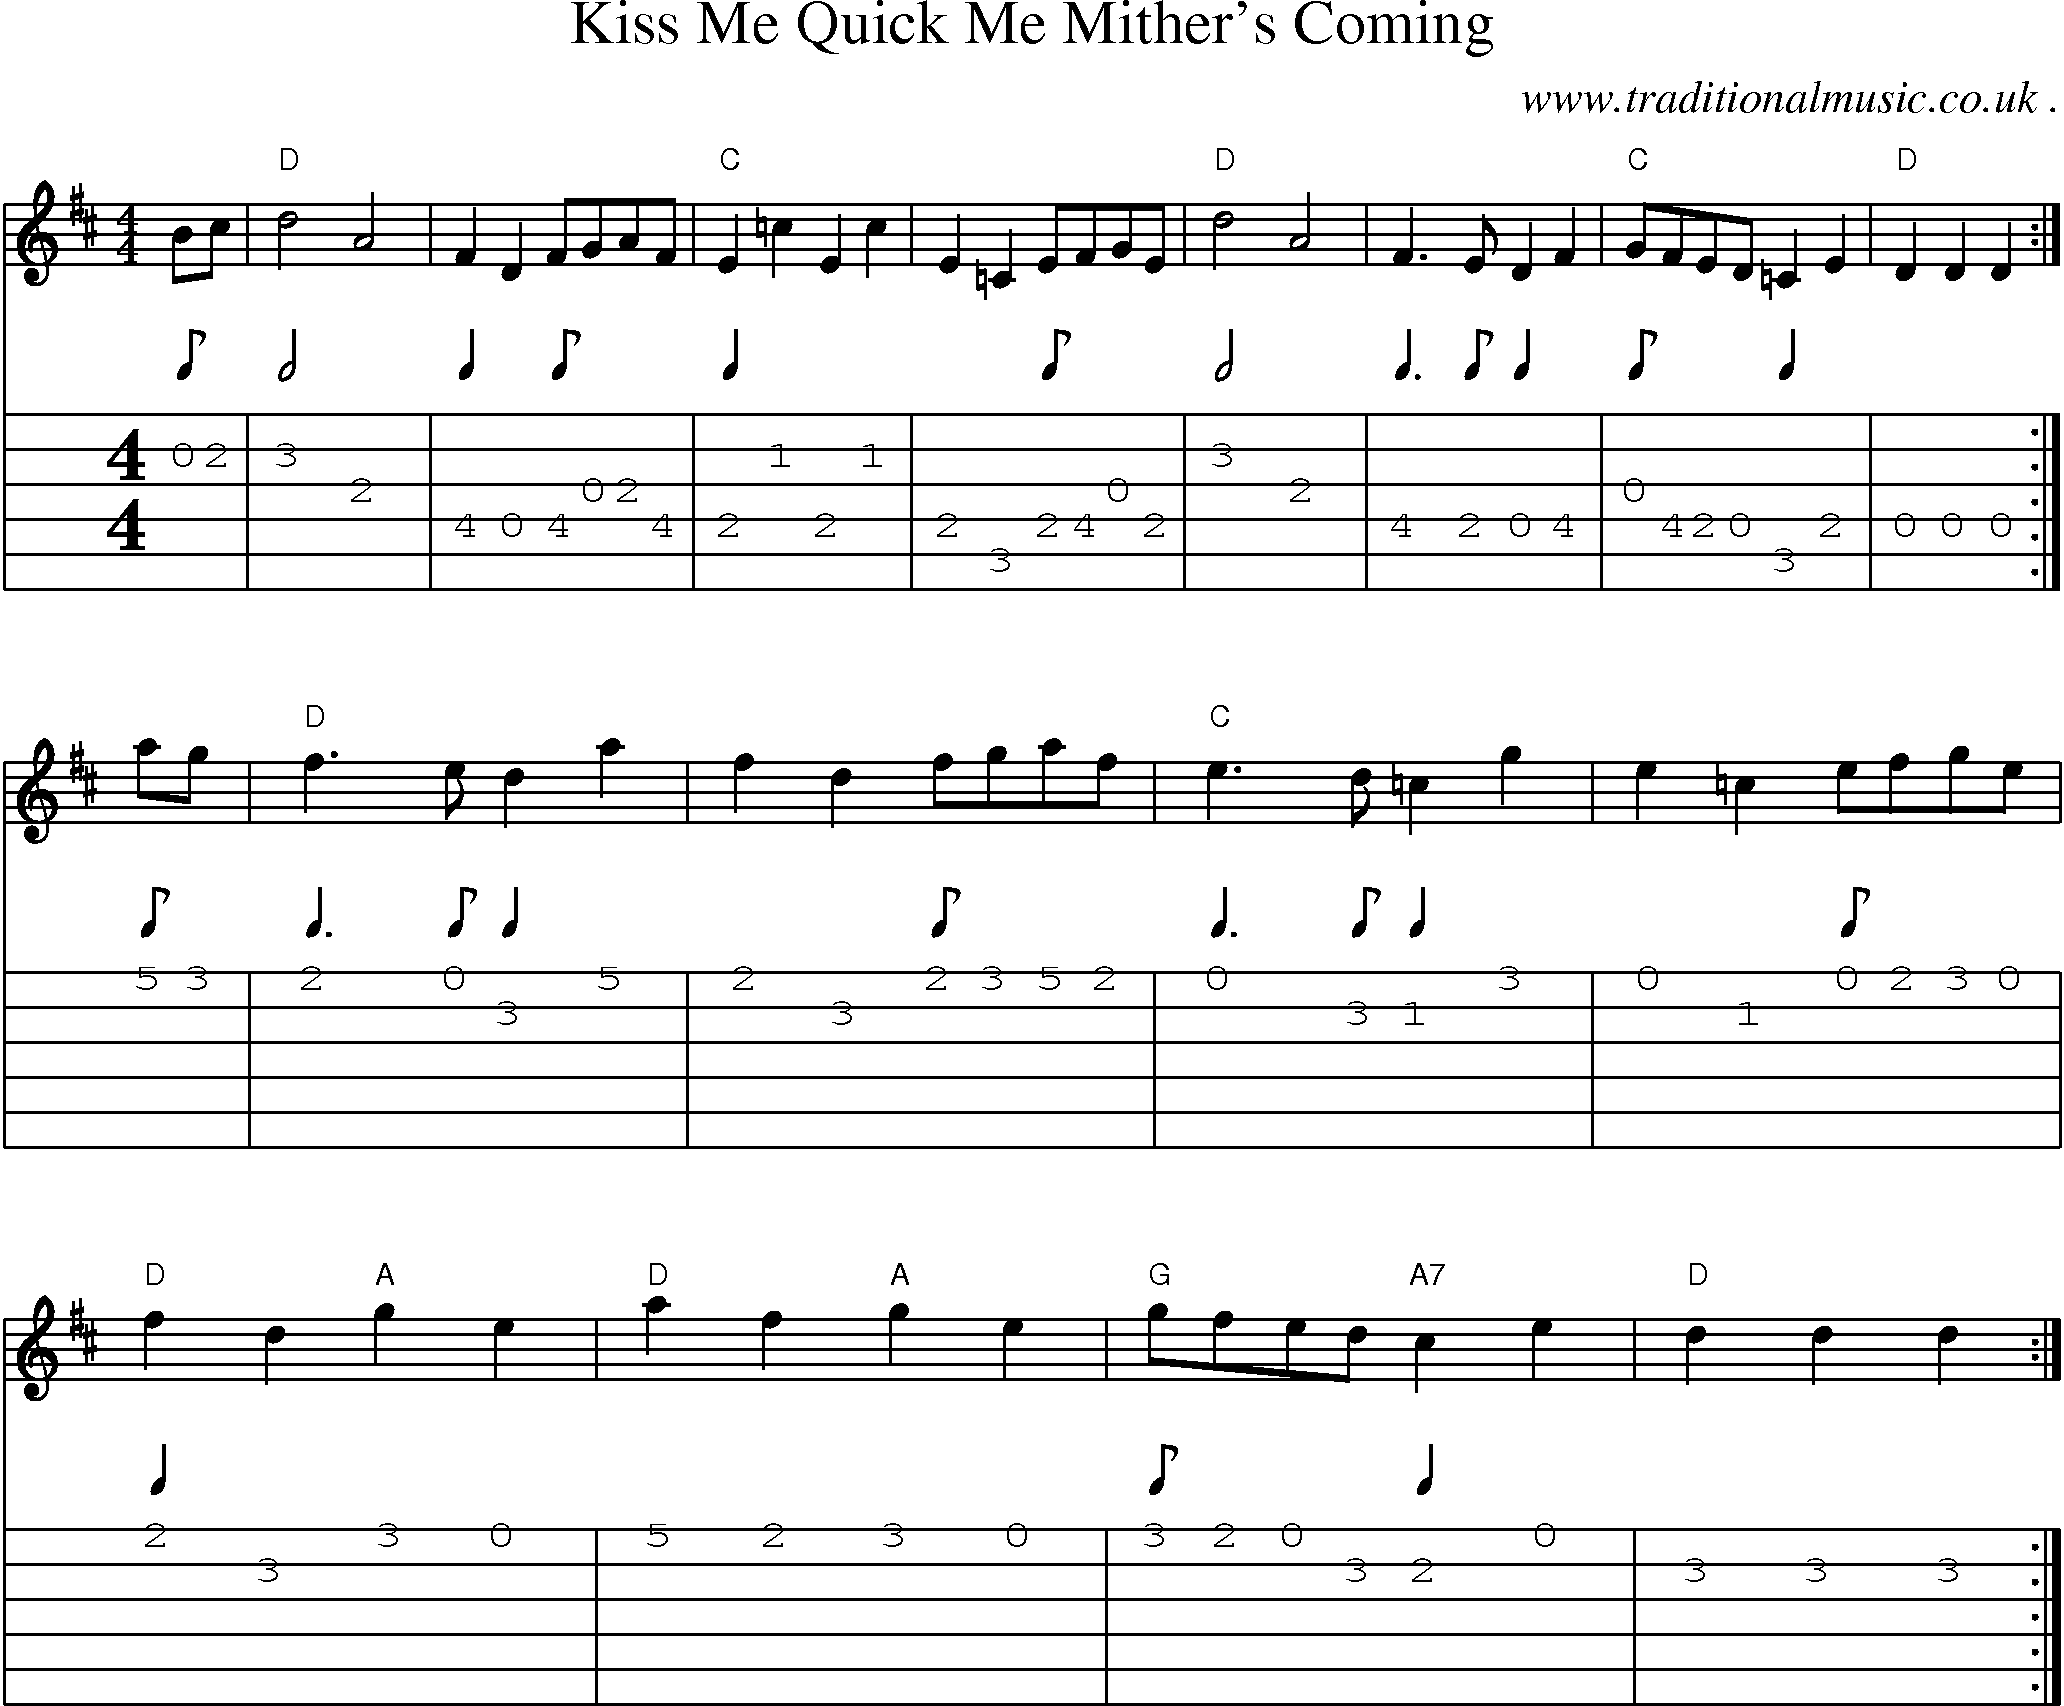 Sheet-Music and Guitar Tabs for Kiss Me Quick Me Mithers Coming